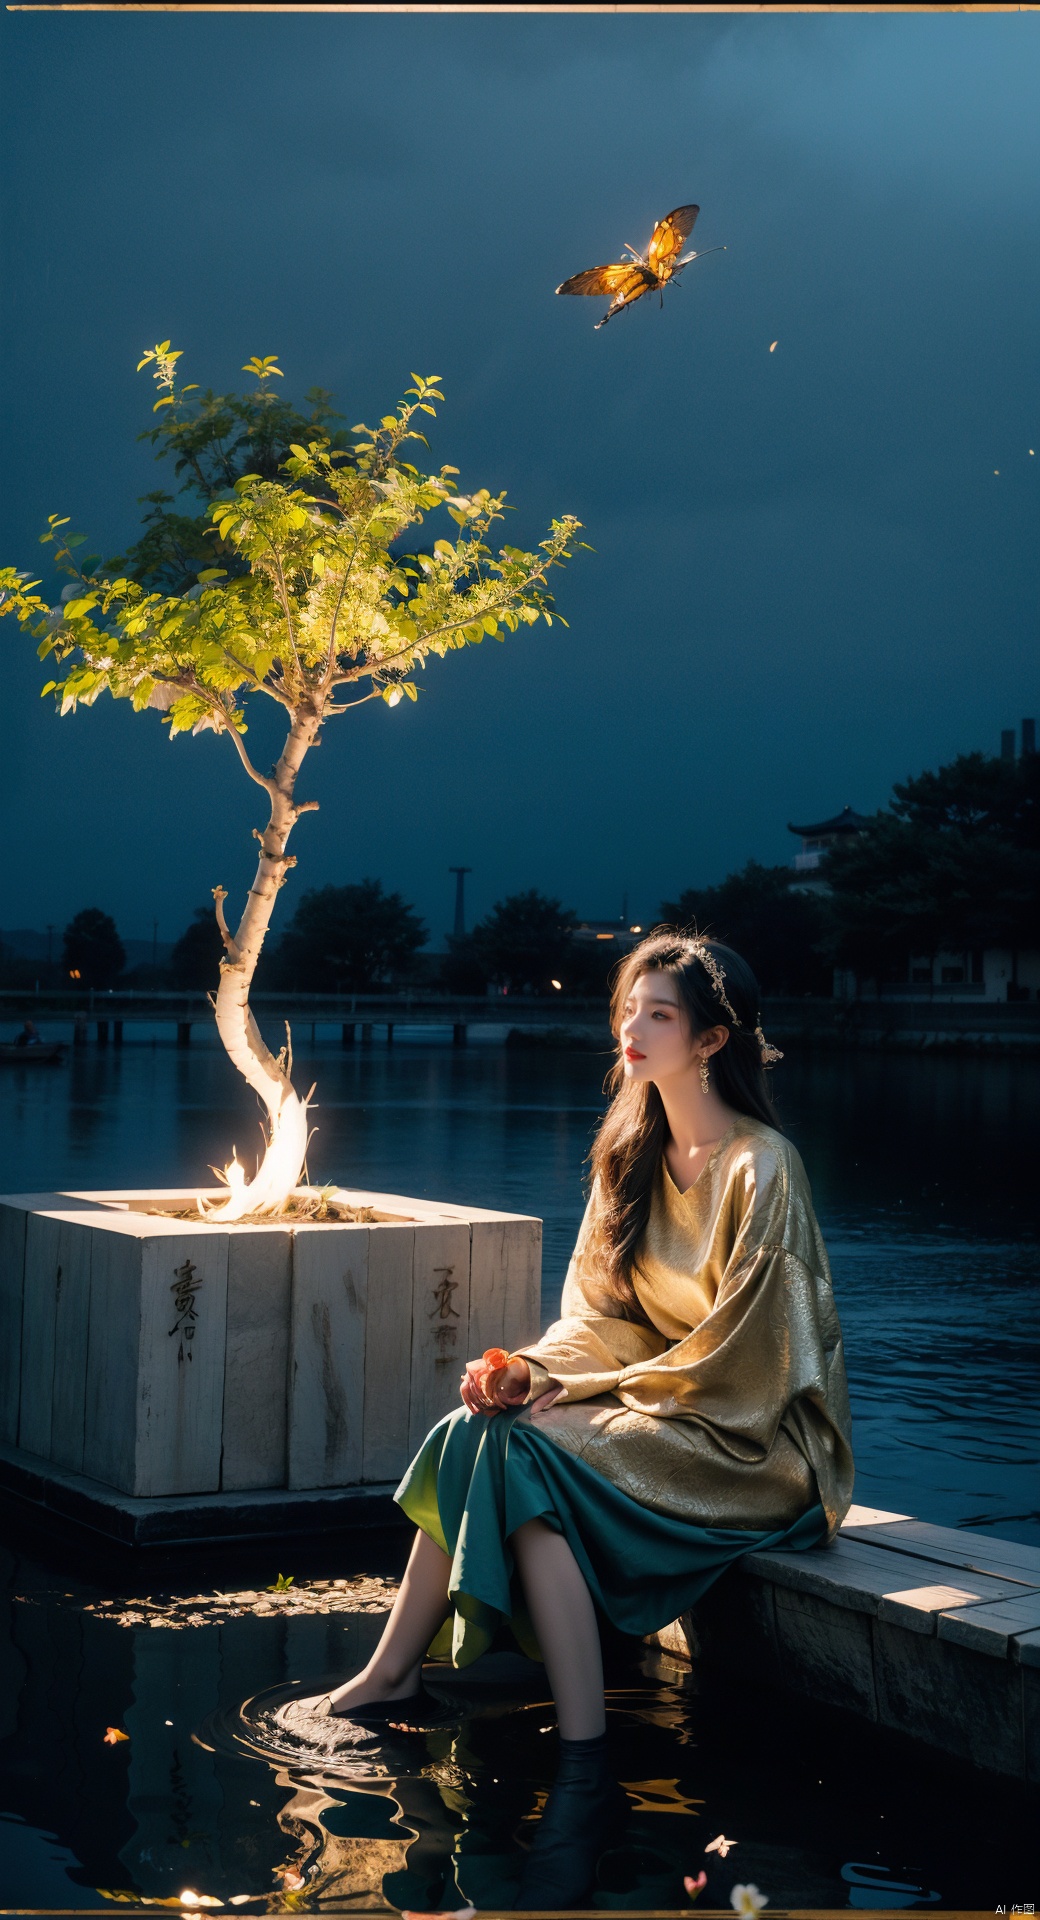  best quality, masterpiece, photo realistic,highly detailed, fashion photography, full body shot,full body photo,(a girl sitting on seawater:1.1), (seawater:1.1), reflection in water, lantern, (bonsai:1.1), (firefly: 1.4), insects, purist, esoteric,occult, geometric,(night:1.1), (gold/black theme:1.2),nature, dress, flowers,butterfly,girl, Aesthetic Background,sen,plan,flowers,tree,guanyin,bj_Devil_angel,flower,machinery,fairy tale girl,vortex,Chinese style,nvshen,ghostdom,Night scene,Colorful portraits,baihuaniang,evil ghost